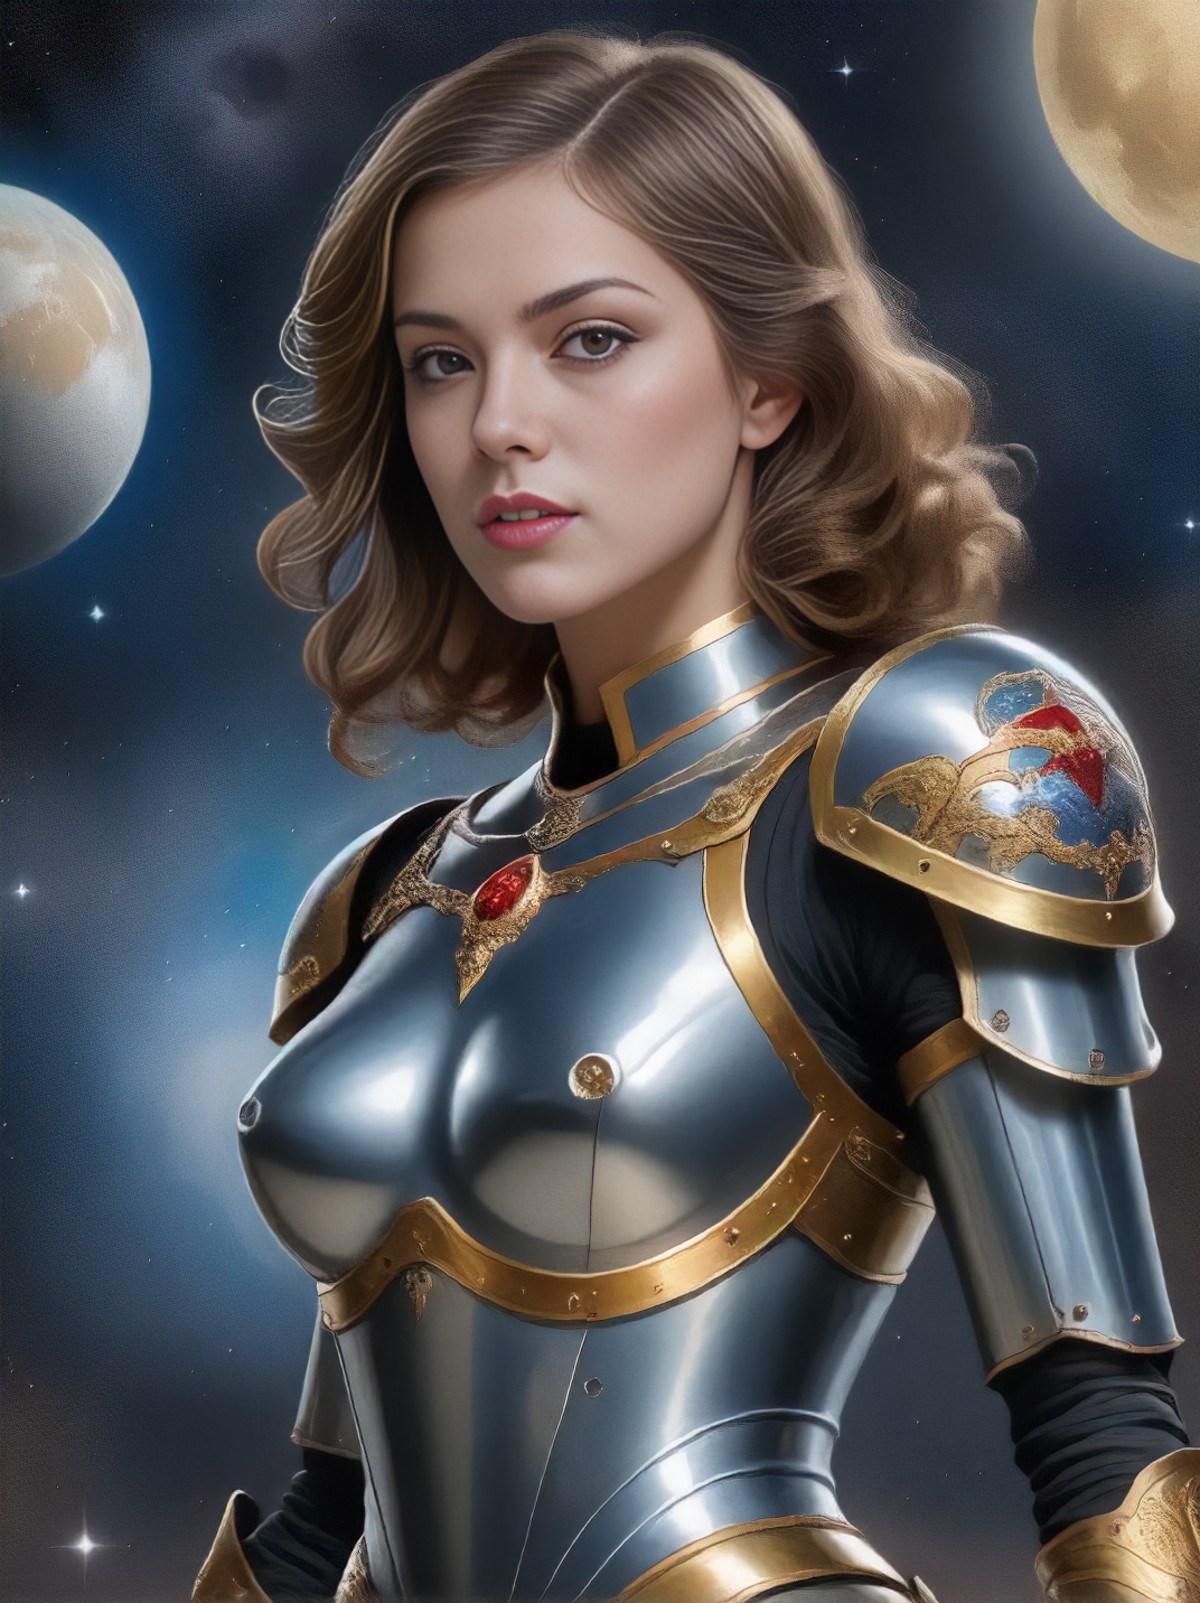 maiden knight, Space-themed, Cosmic, celestial, stars, galaxies, nebulas, planets, science fiction, highly detailed, howar...